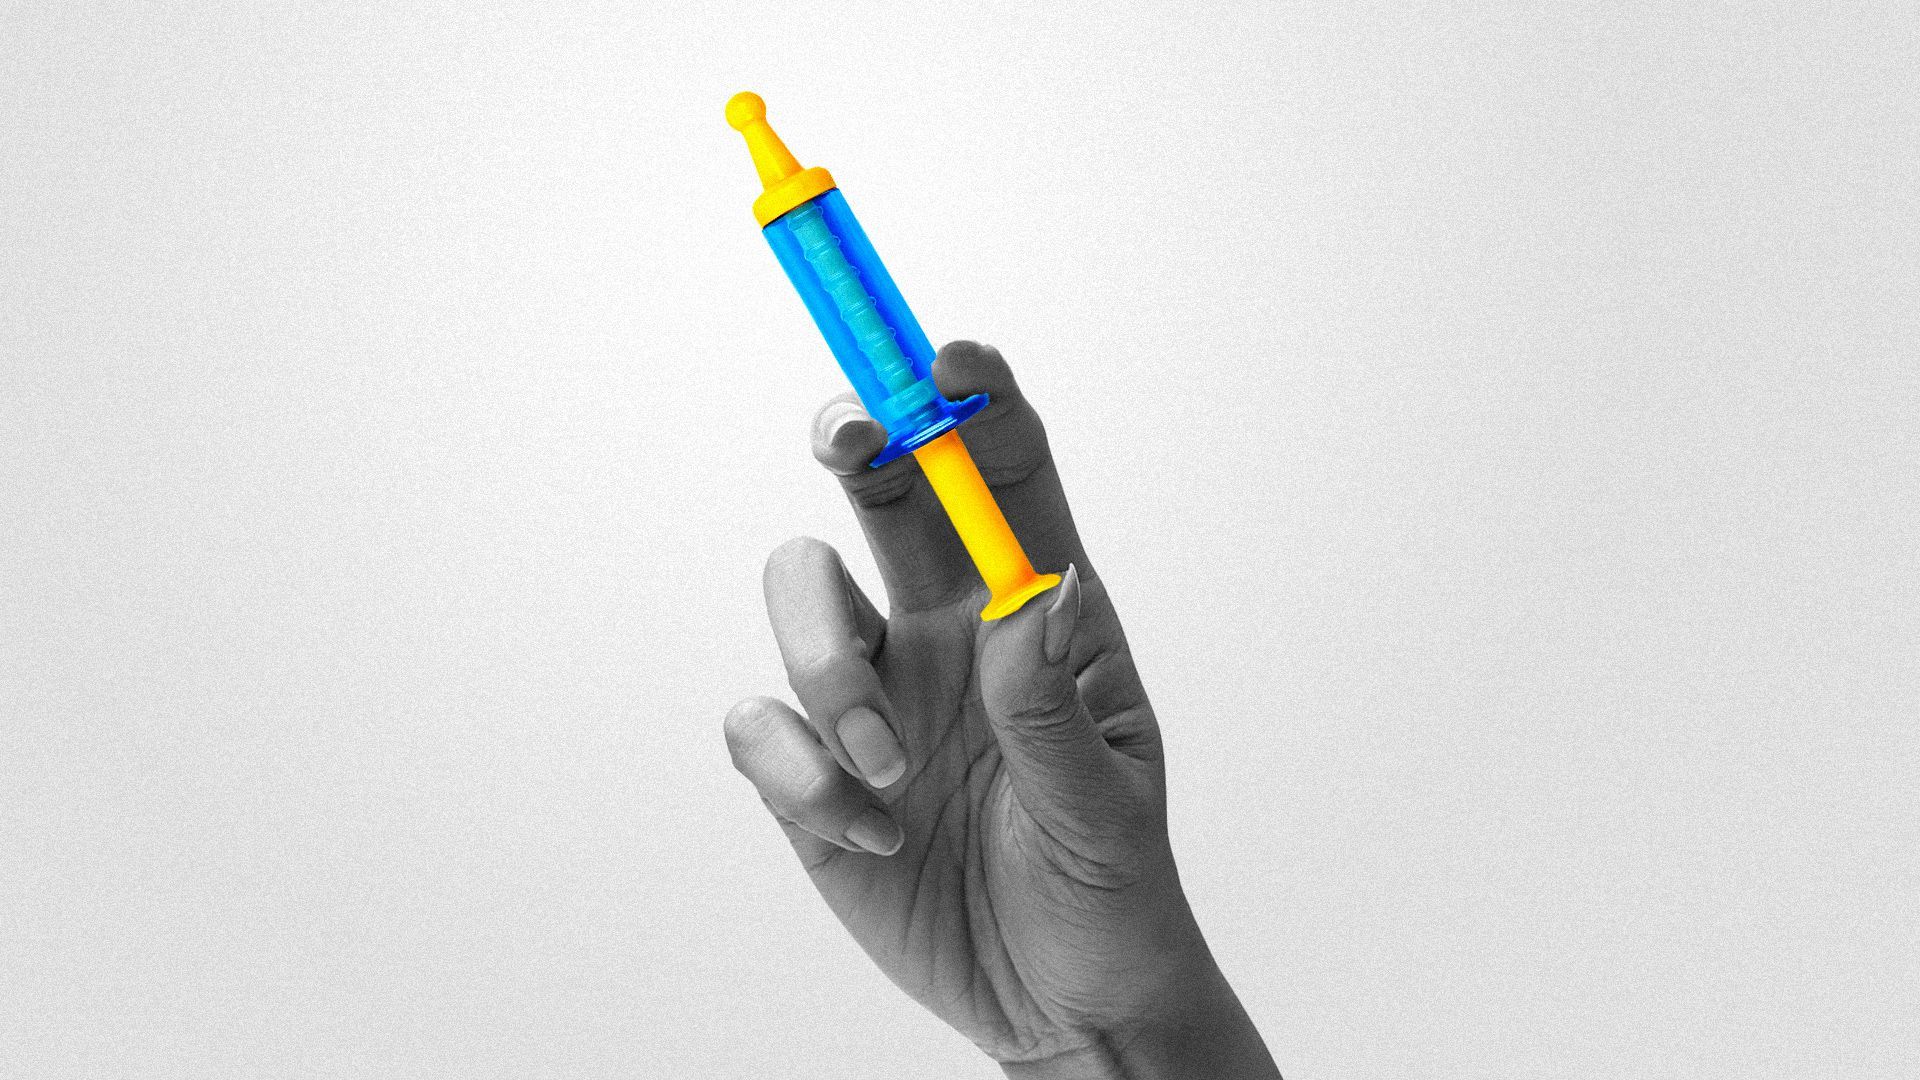 Illustration of a hand holding a toy syringe.  